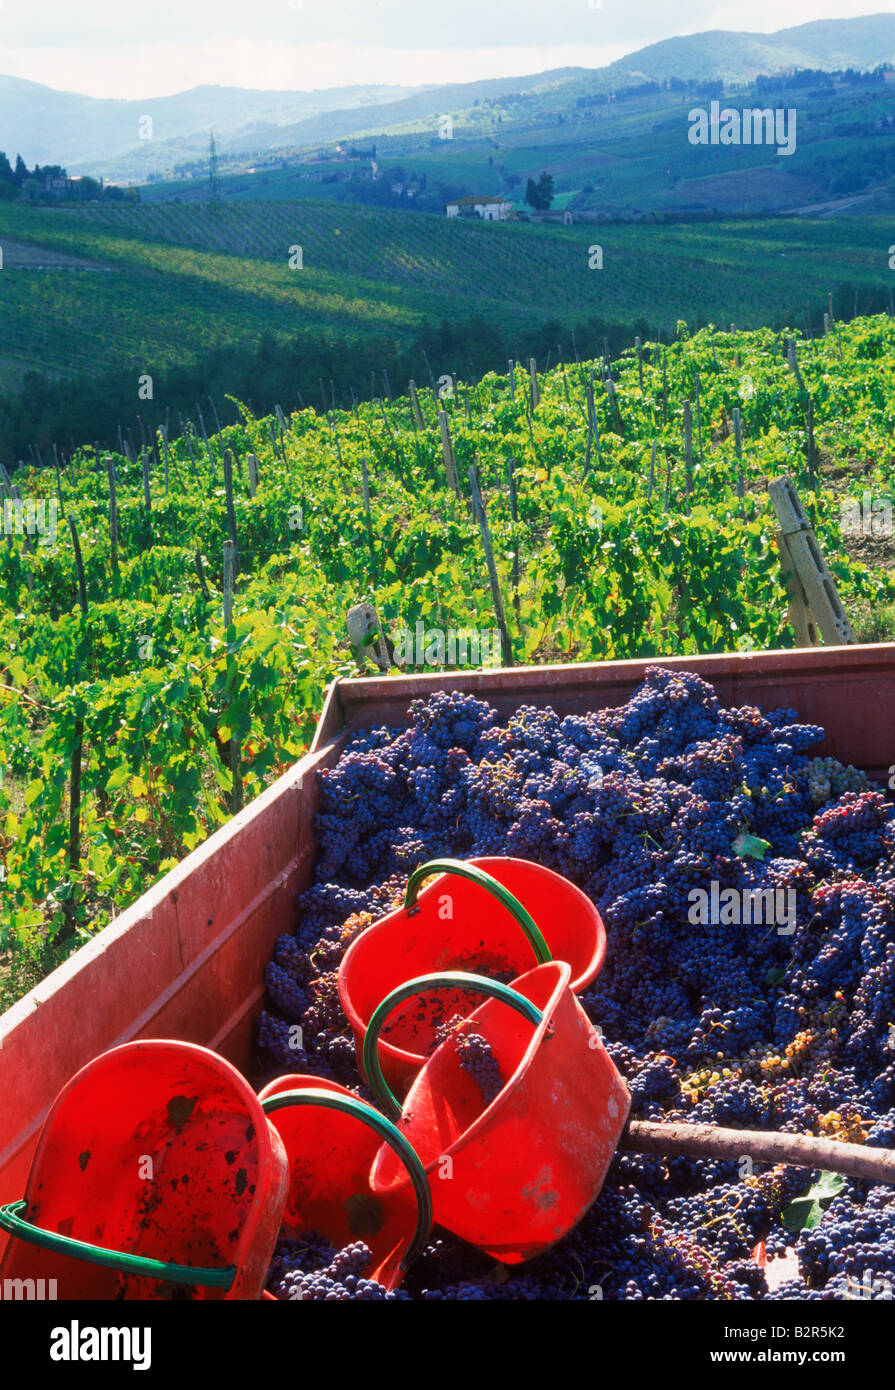 Wagon filled with chianti grapes and buckets in Toscana region of France Stock Photo